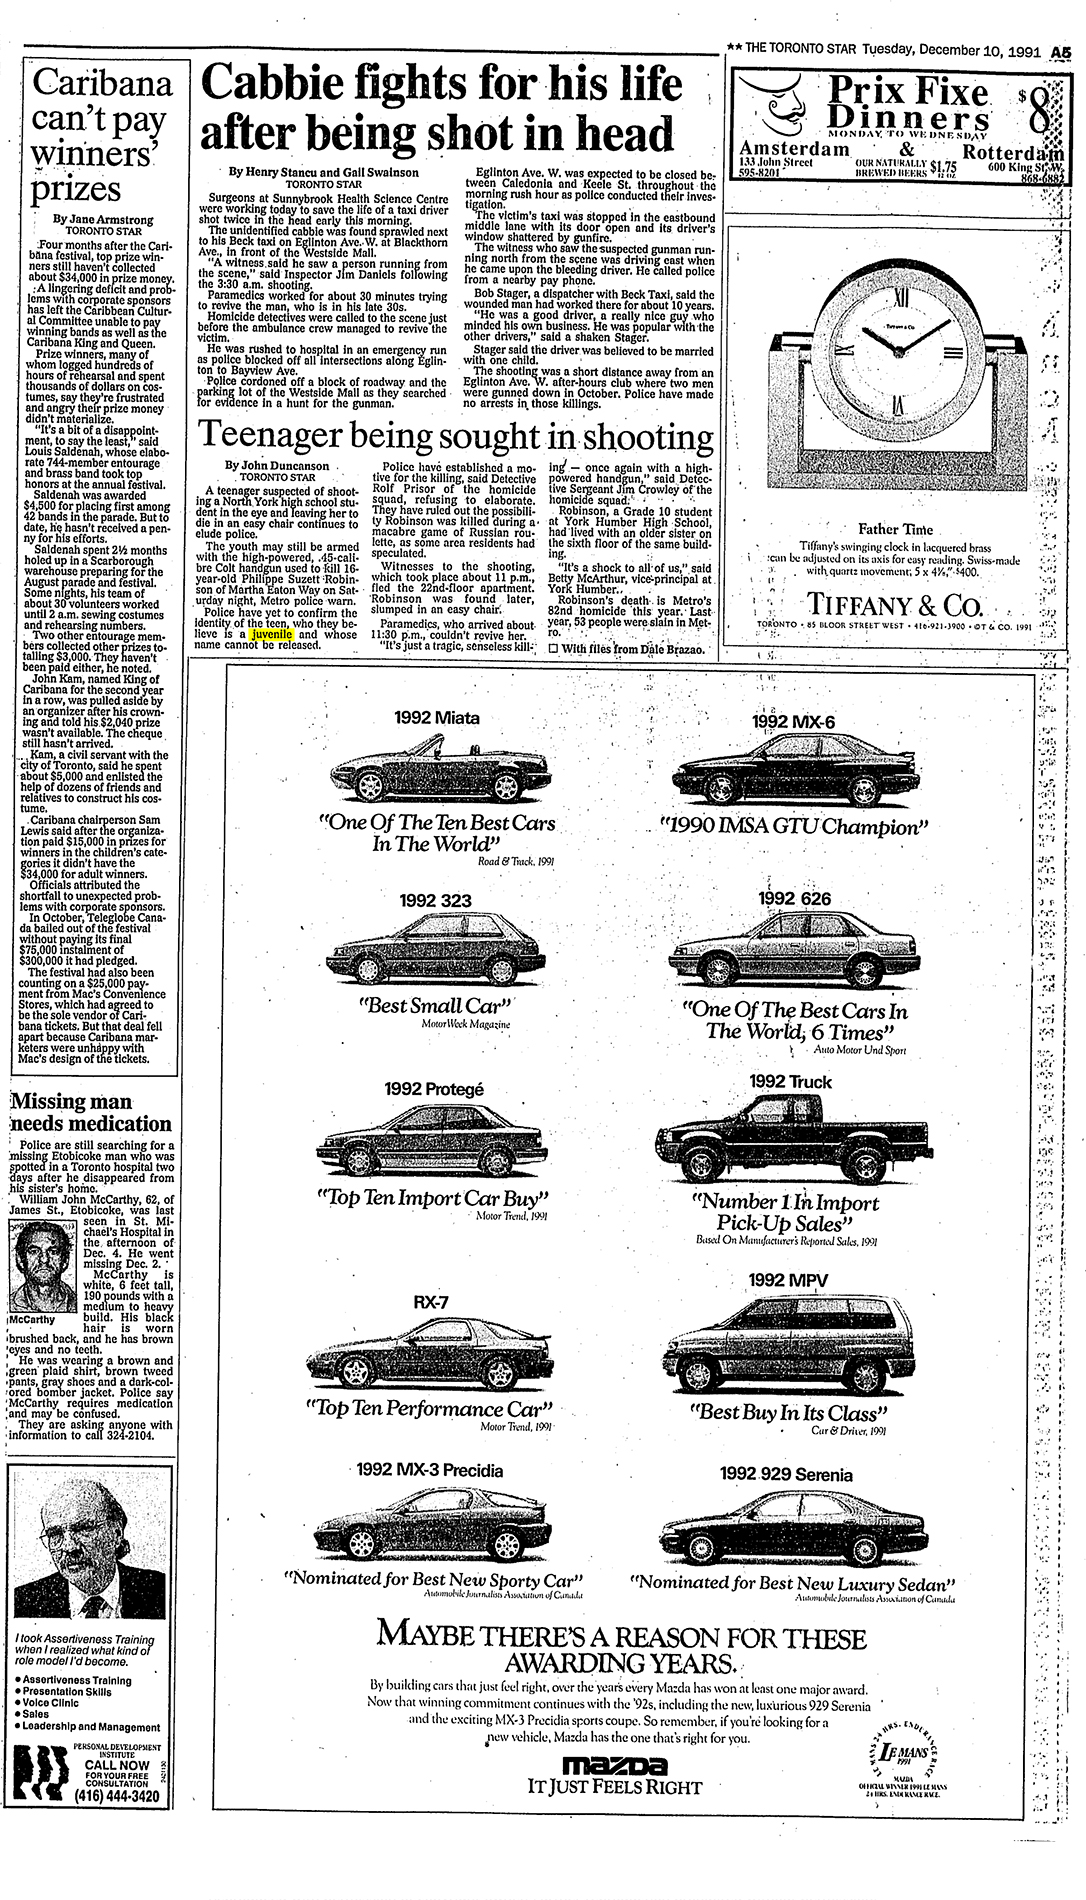 A Toronto Star article dated December 10th, 1991 featuring an article about the unidentified young offender.